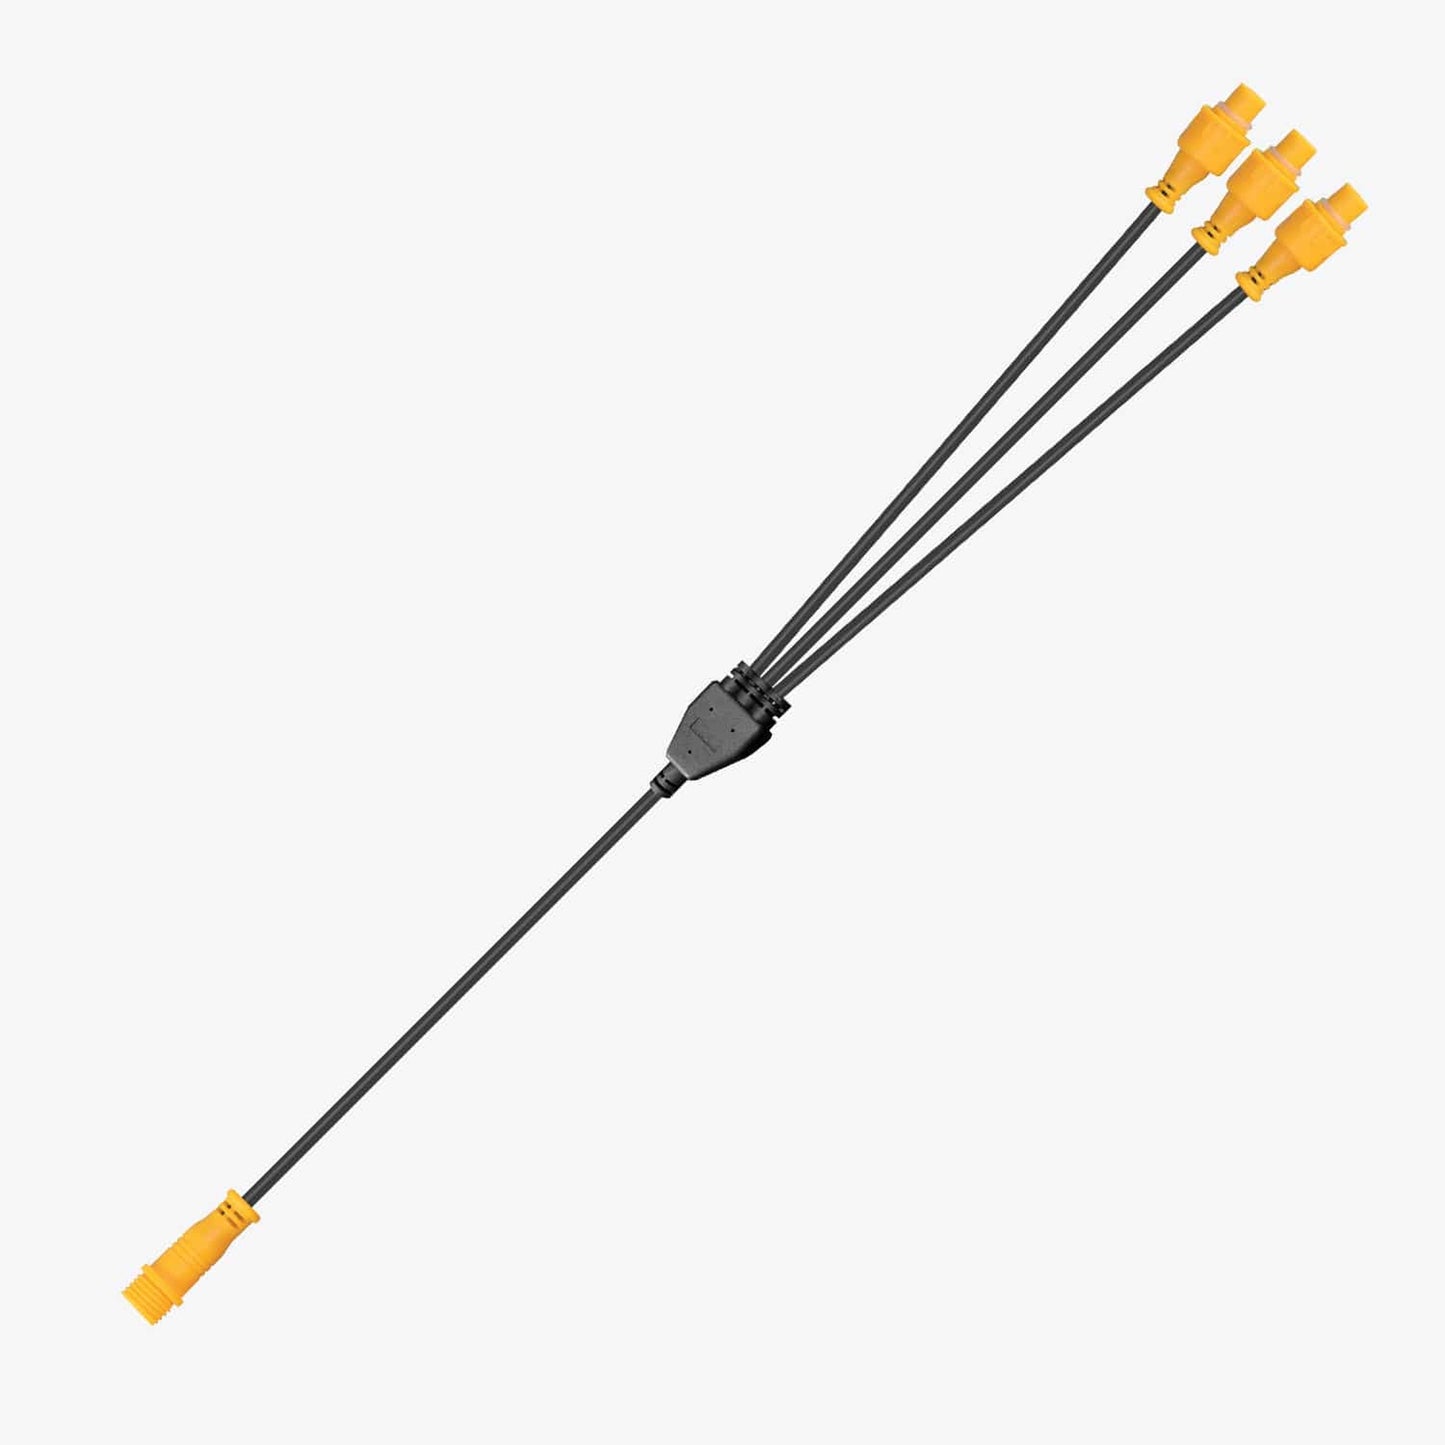 Hard Korr Splitter cables with orange 4-pin plugs